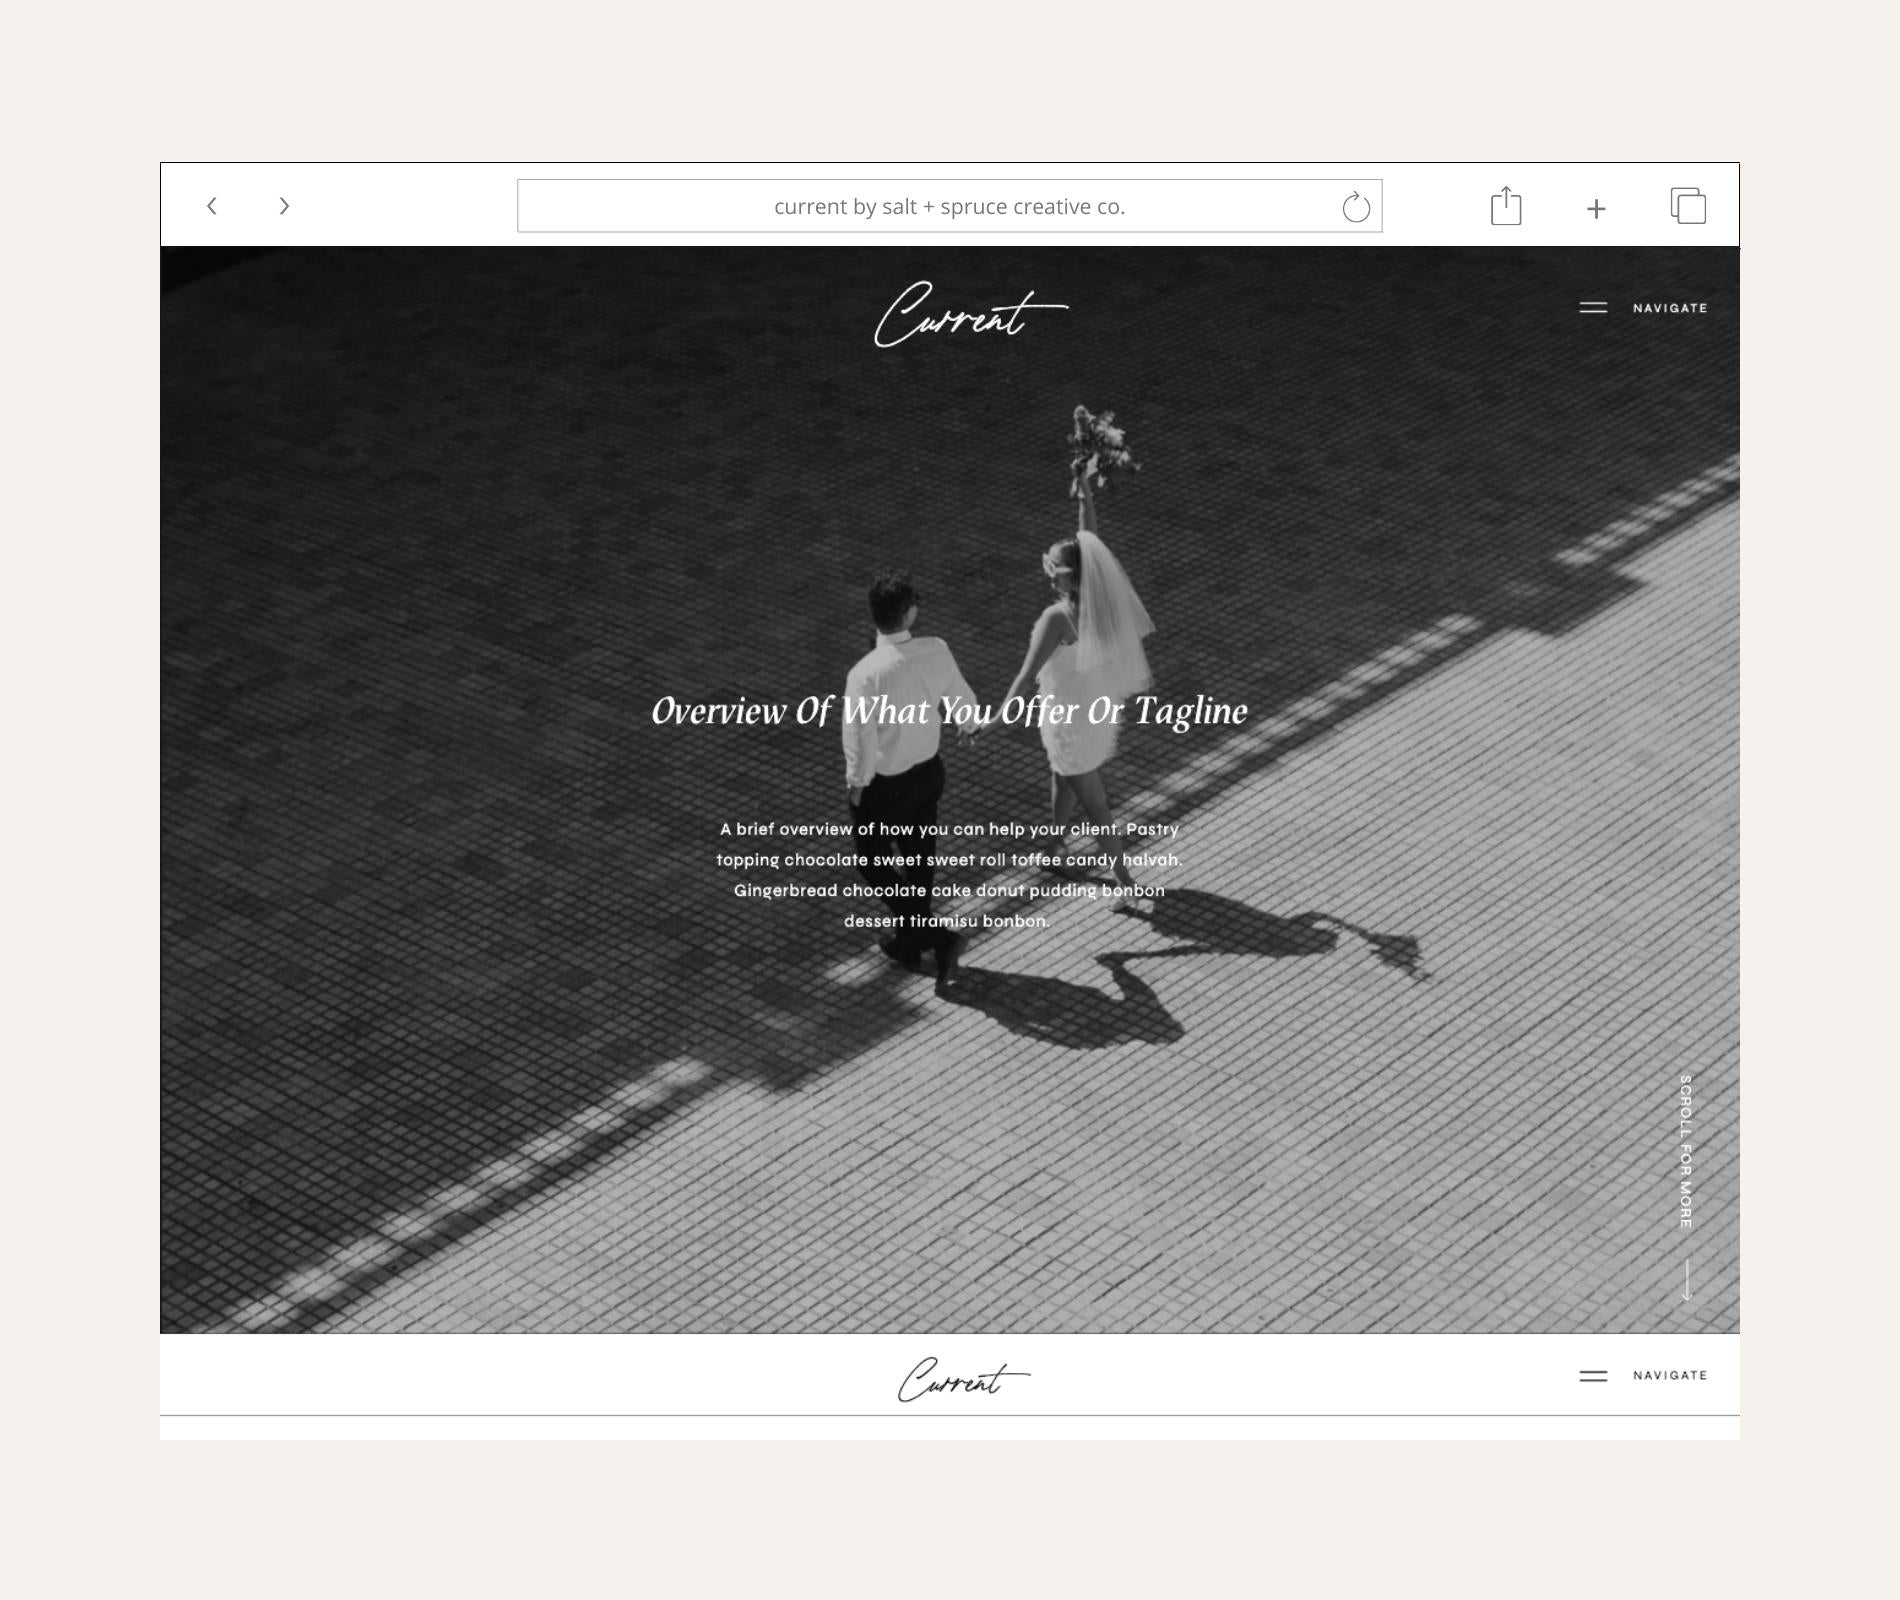 Current Showit Template by Salt + Spruce Creative